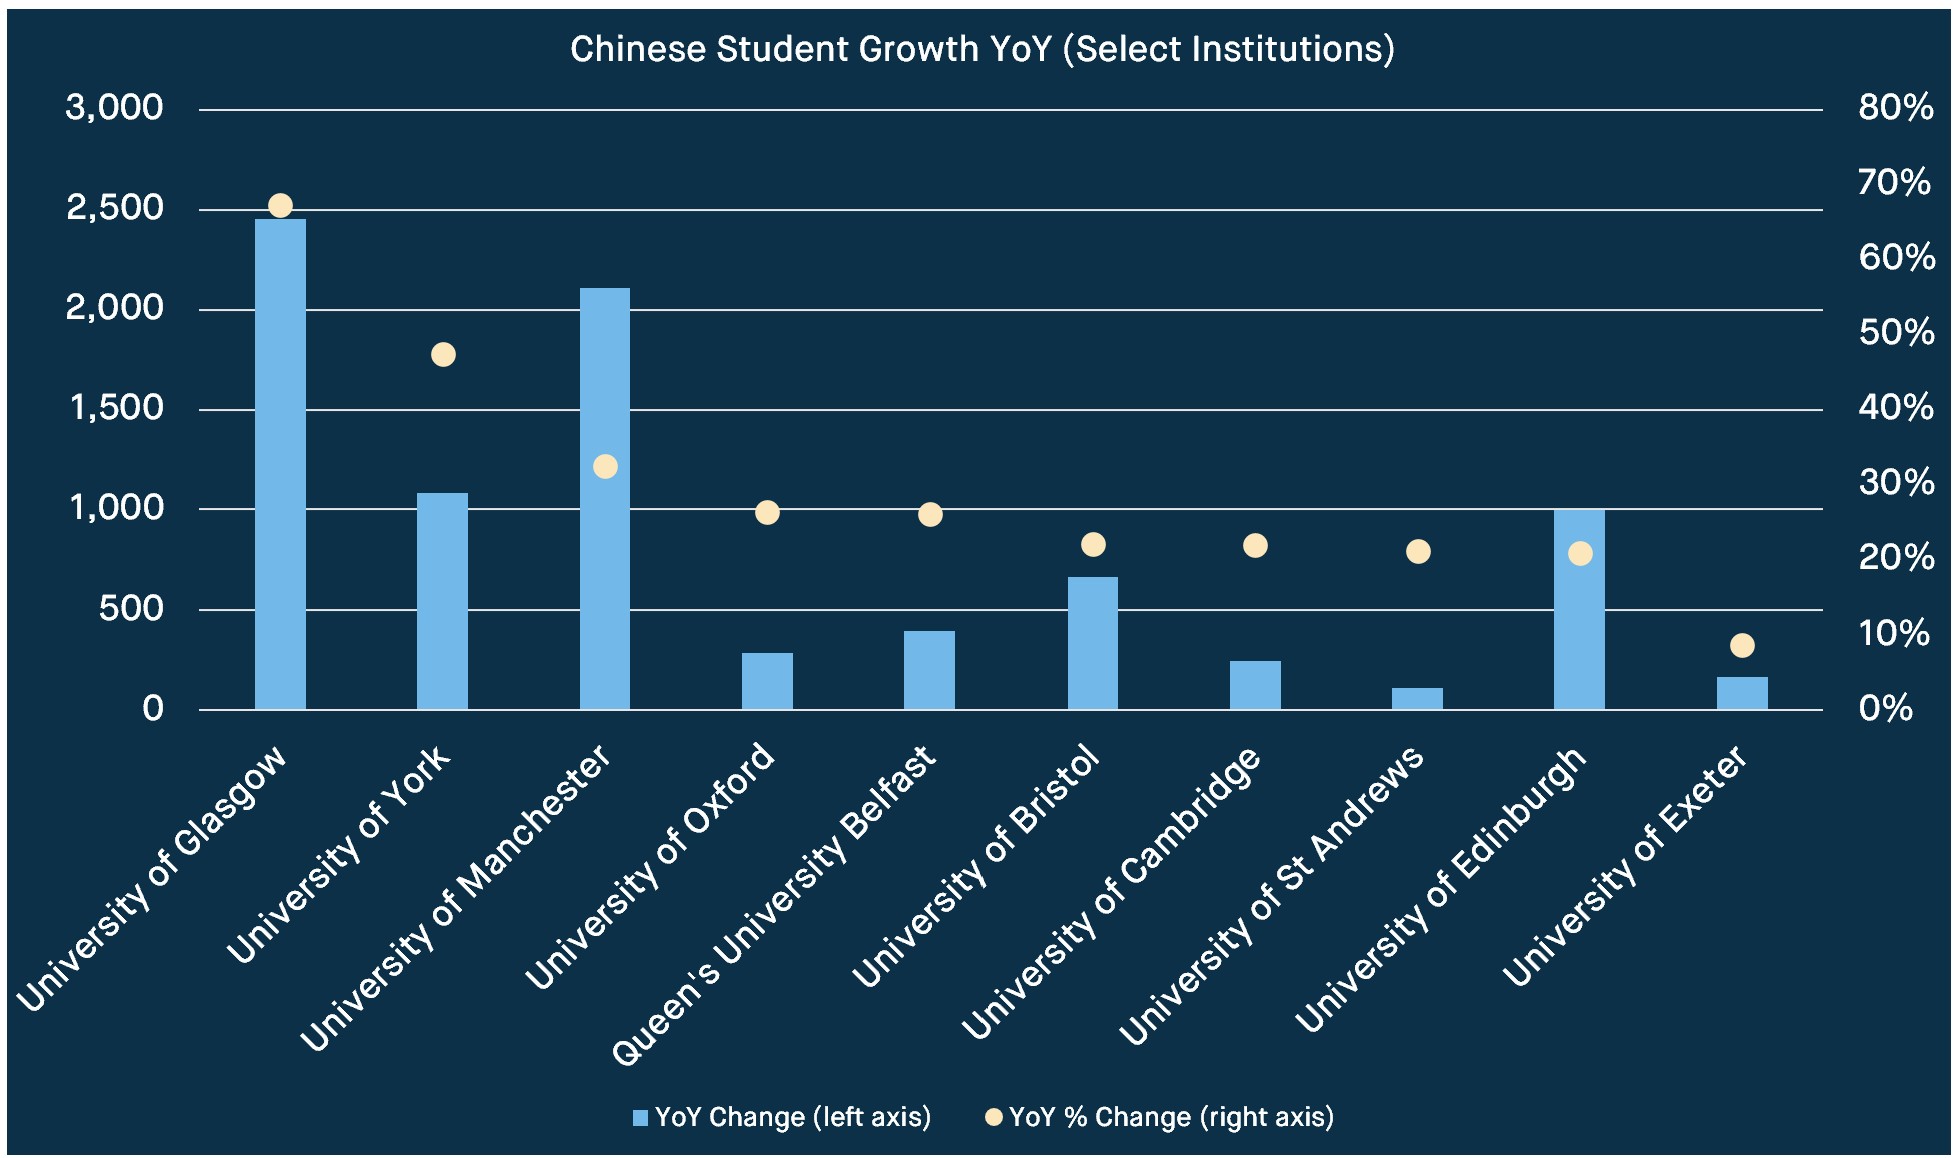 HESA Data Shows Continued Growth in Chinese Students | StuRents News